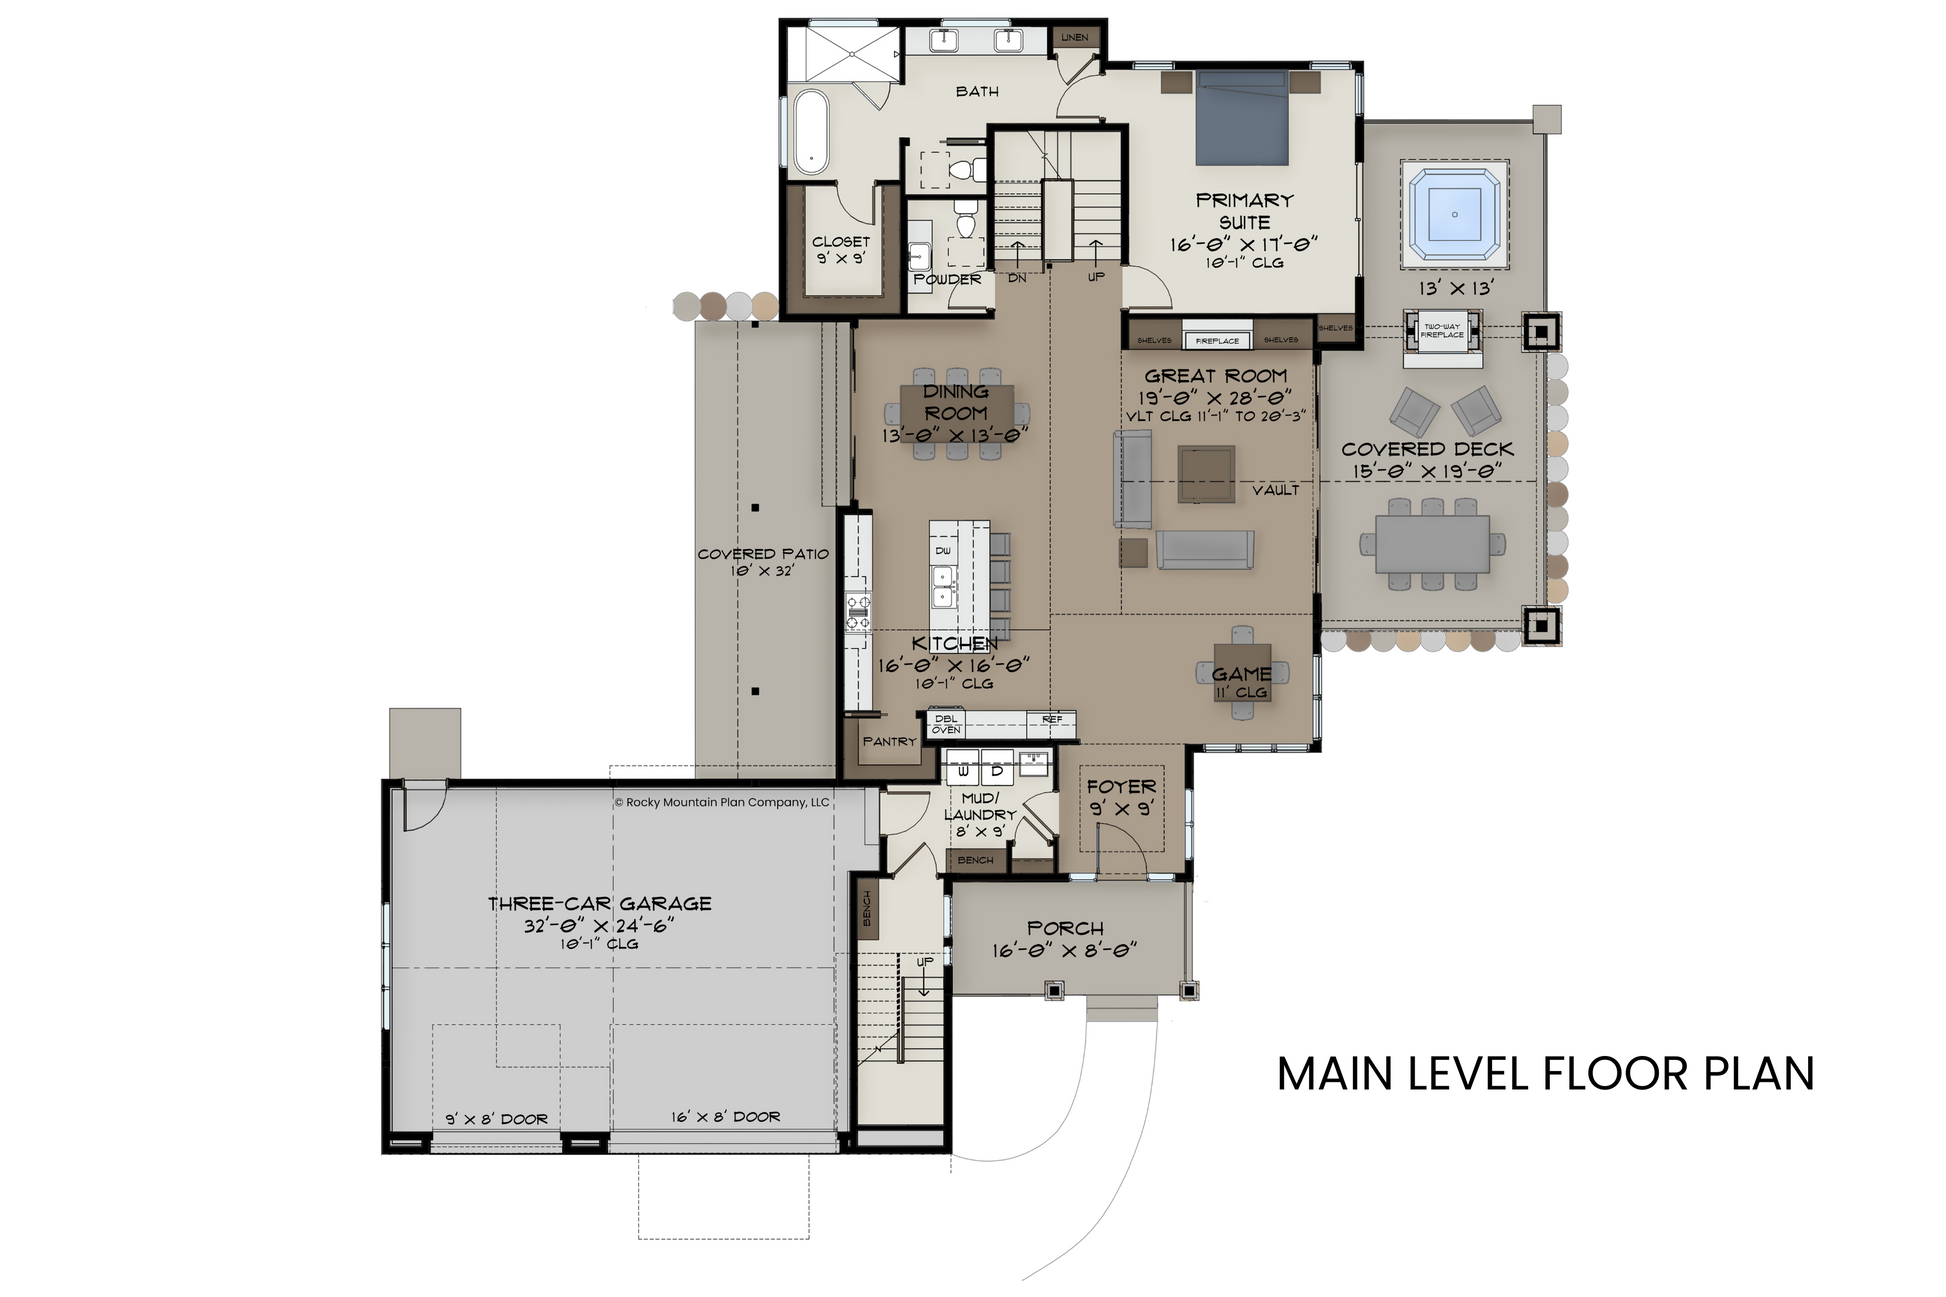 Ultimate-Vacation-Lodge-Plan-with-Guest-Suites-Main-Level-Floor-Plan-Rocky-Mountain-Plan-Company-Meadow-Creek